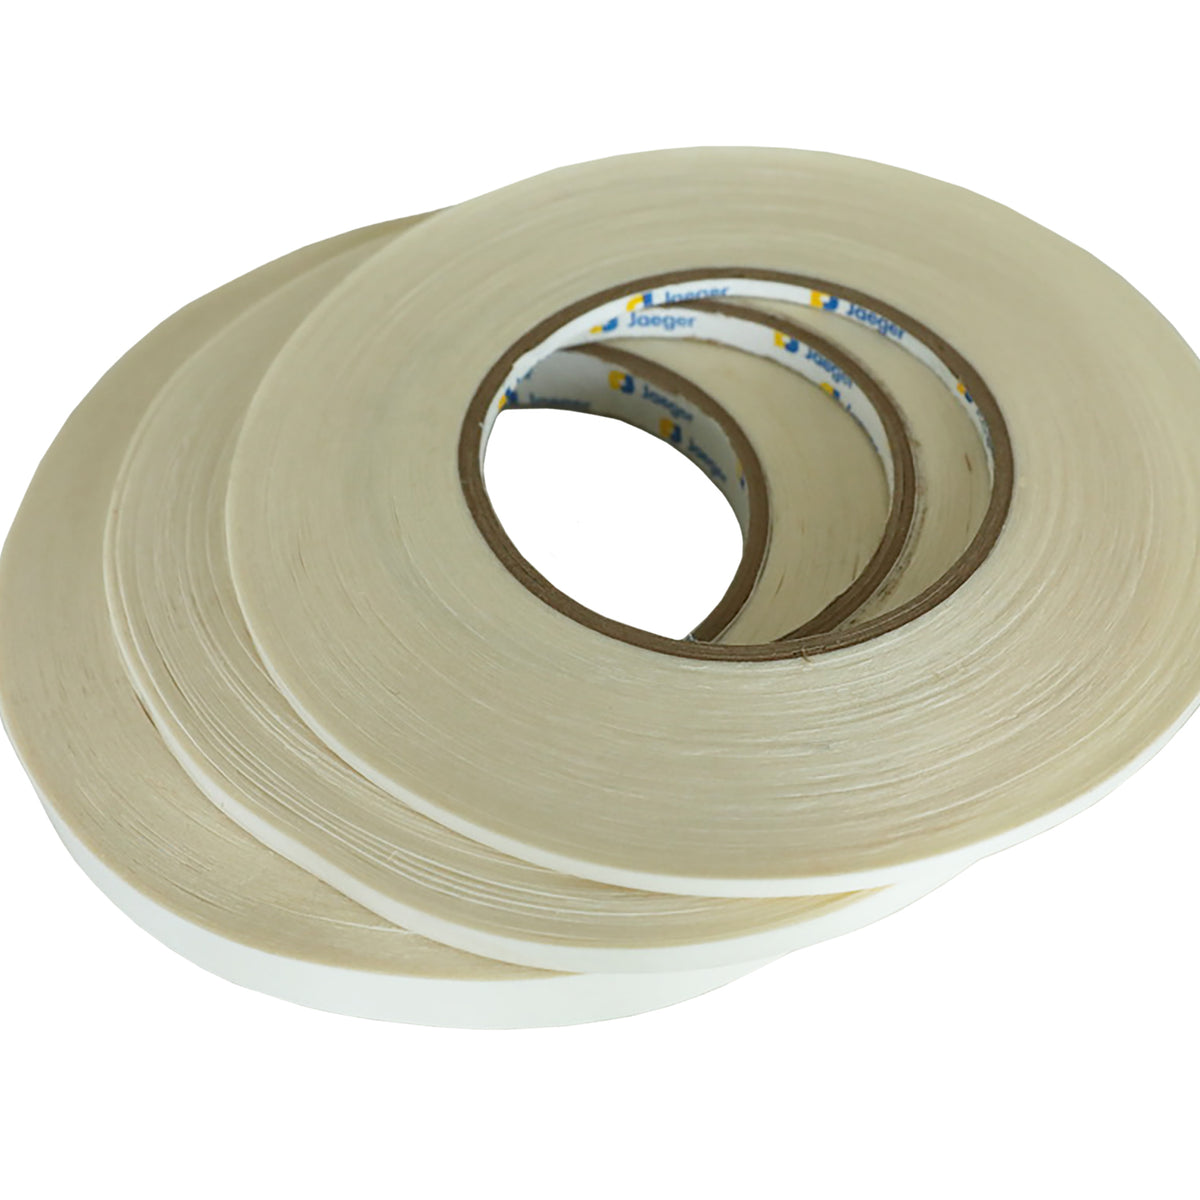 Jaeger - Premium Double Sided Assembly Tape - (50 meter roll)